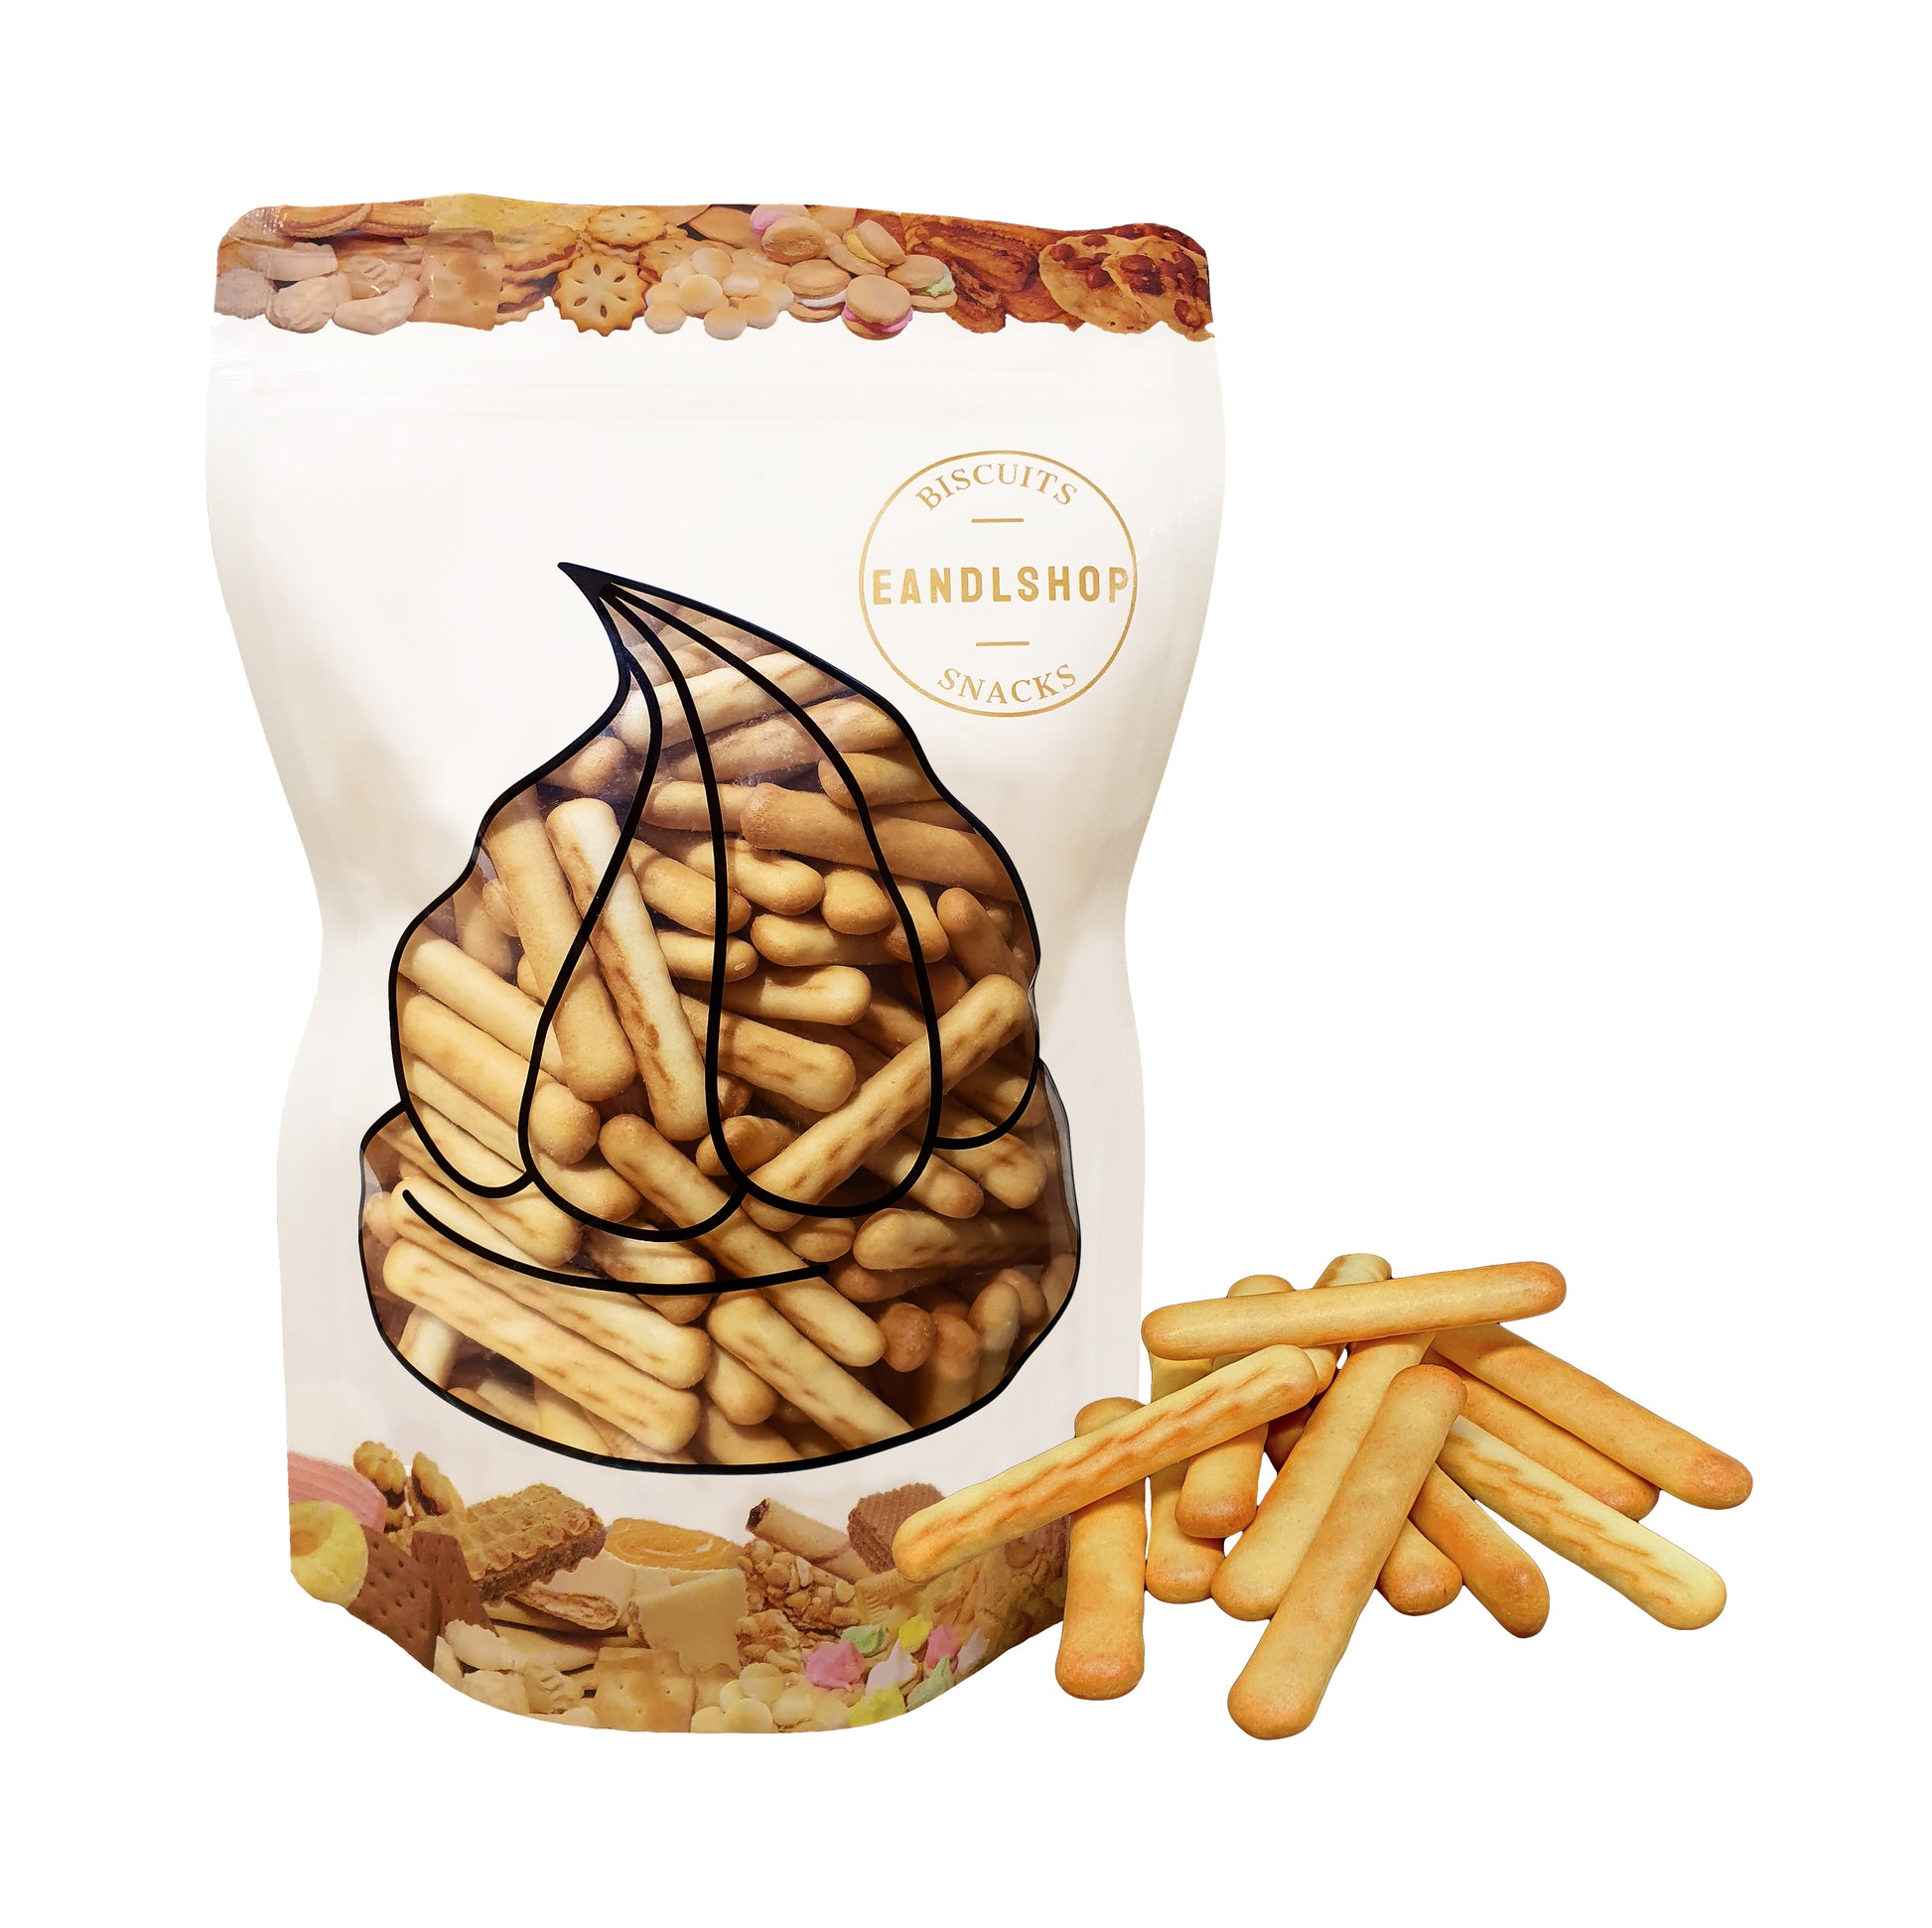 Stick Biscuit (Potato). Old-school biscuits, modern snacks (chips, crackers), cakes, gummies, plums, dried fruits, nuts, herbal tea – available at www.EANDLSHOP.com